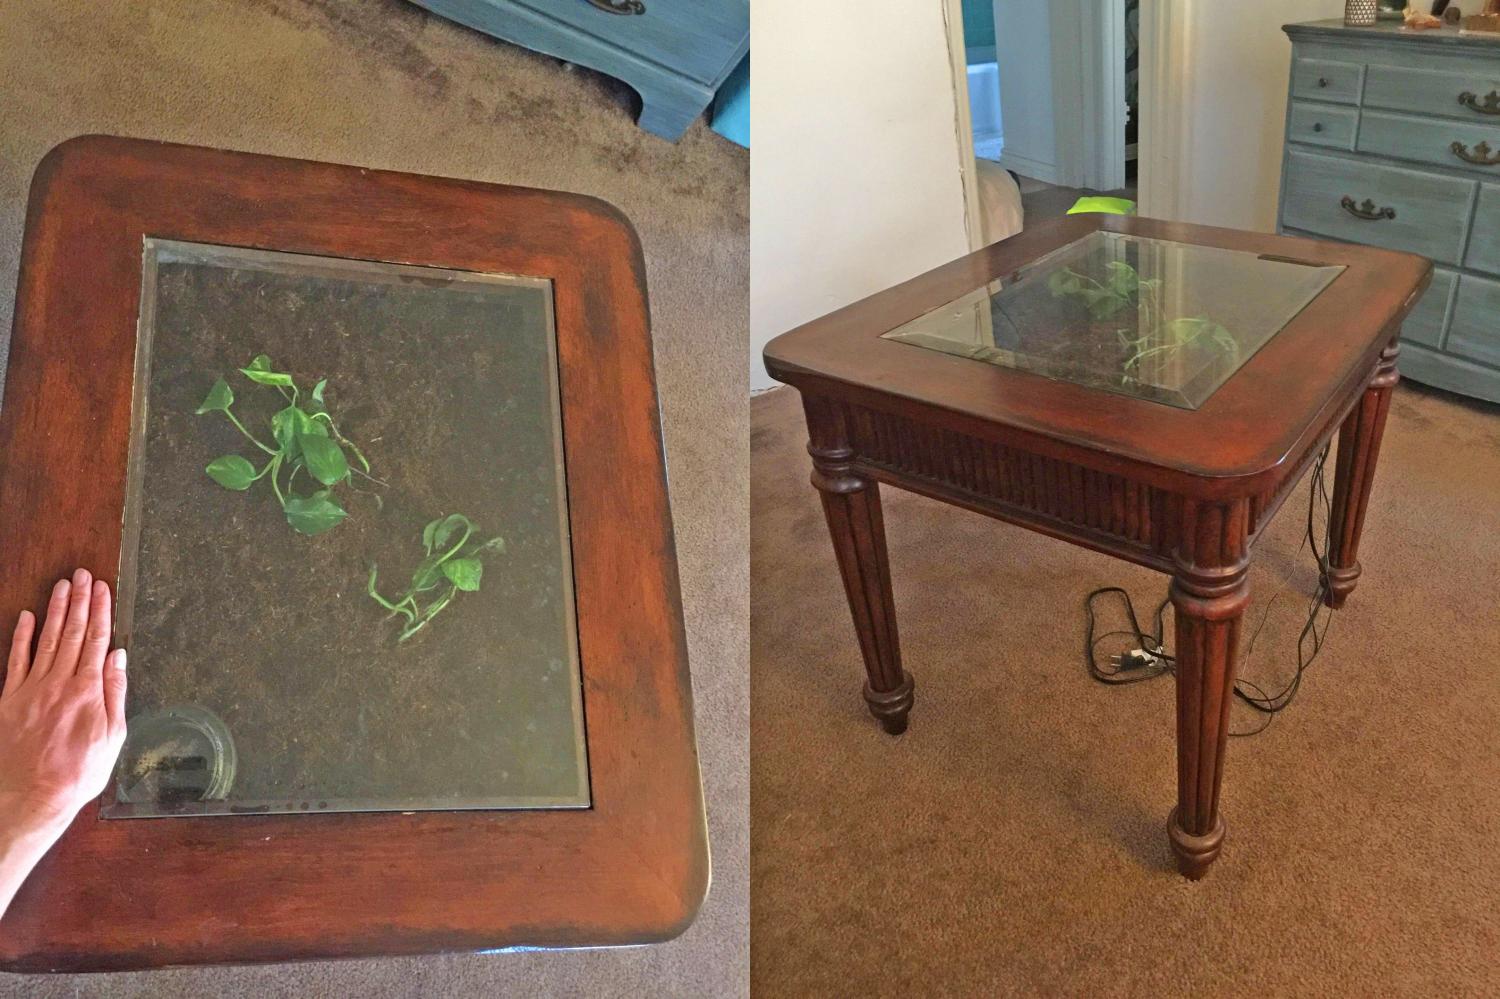 Vintage Terrarium Coffee Table filled with soil and a cutting of money plant